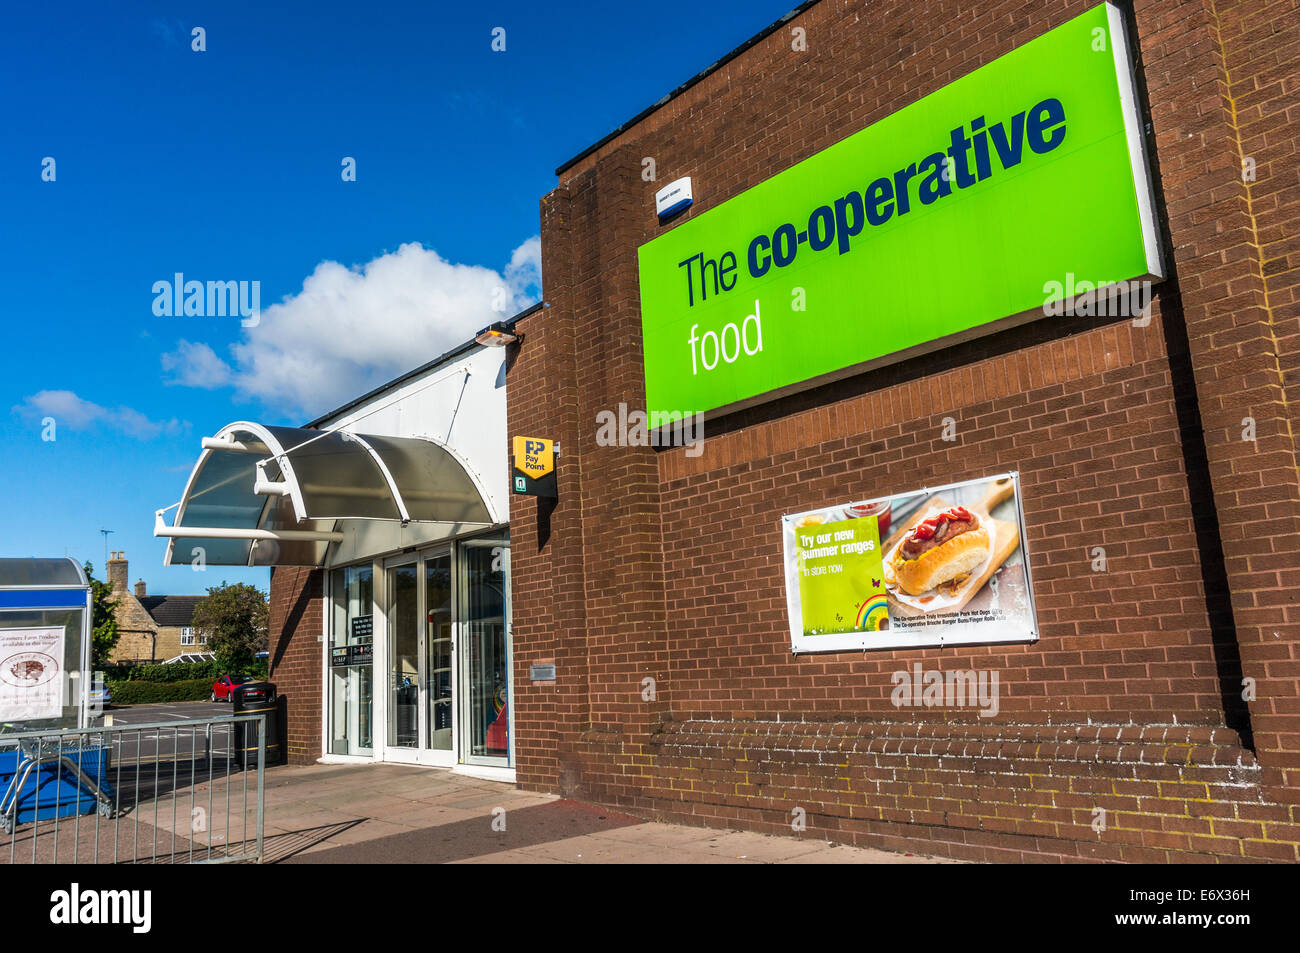 The co-operative food store in Market Deeping, near Peterborough, England, UK. Stock Photo